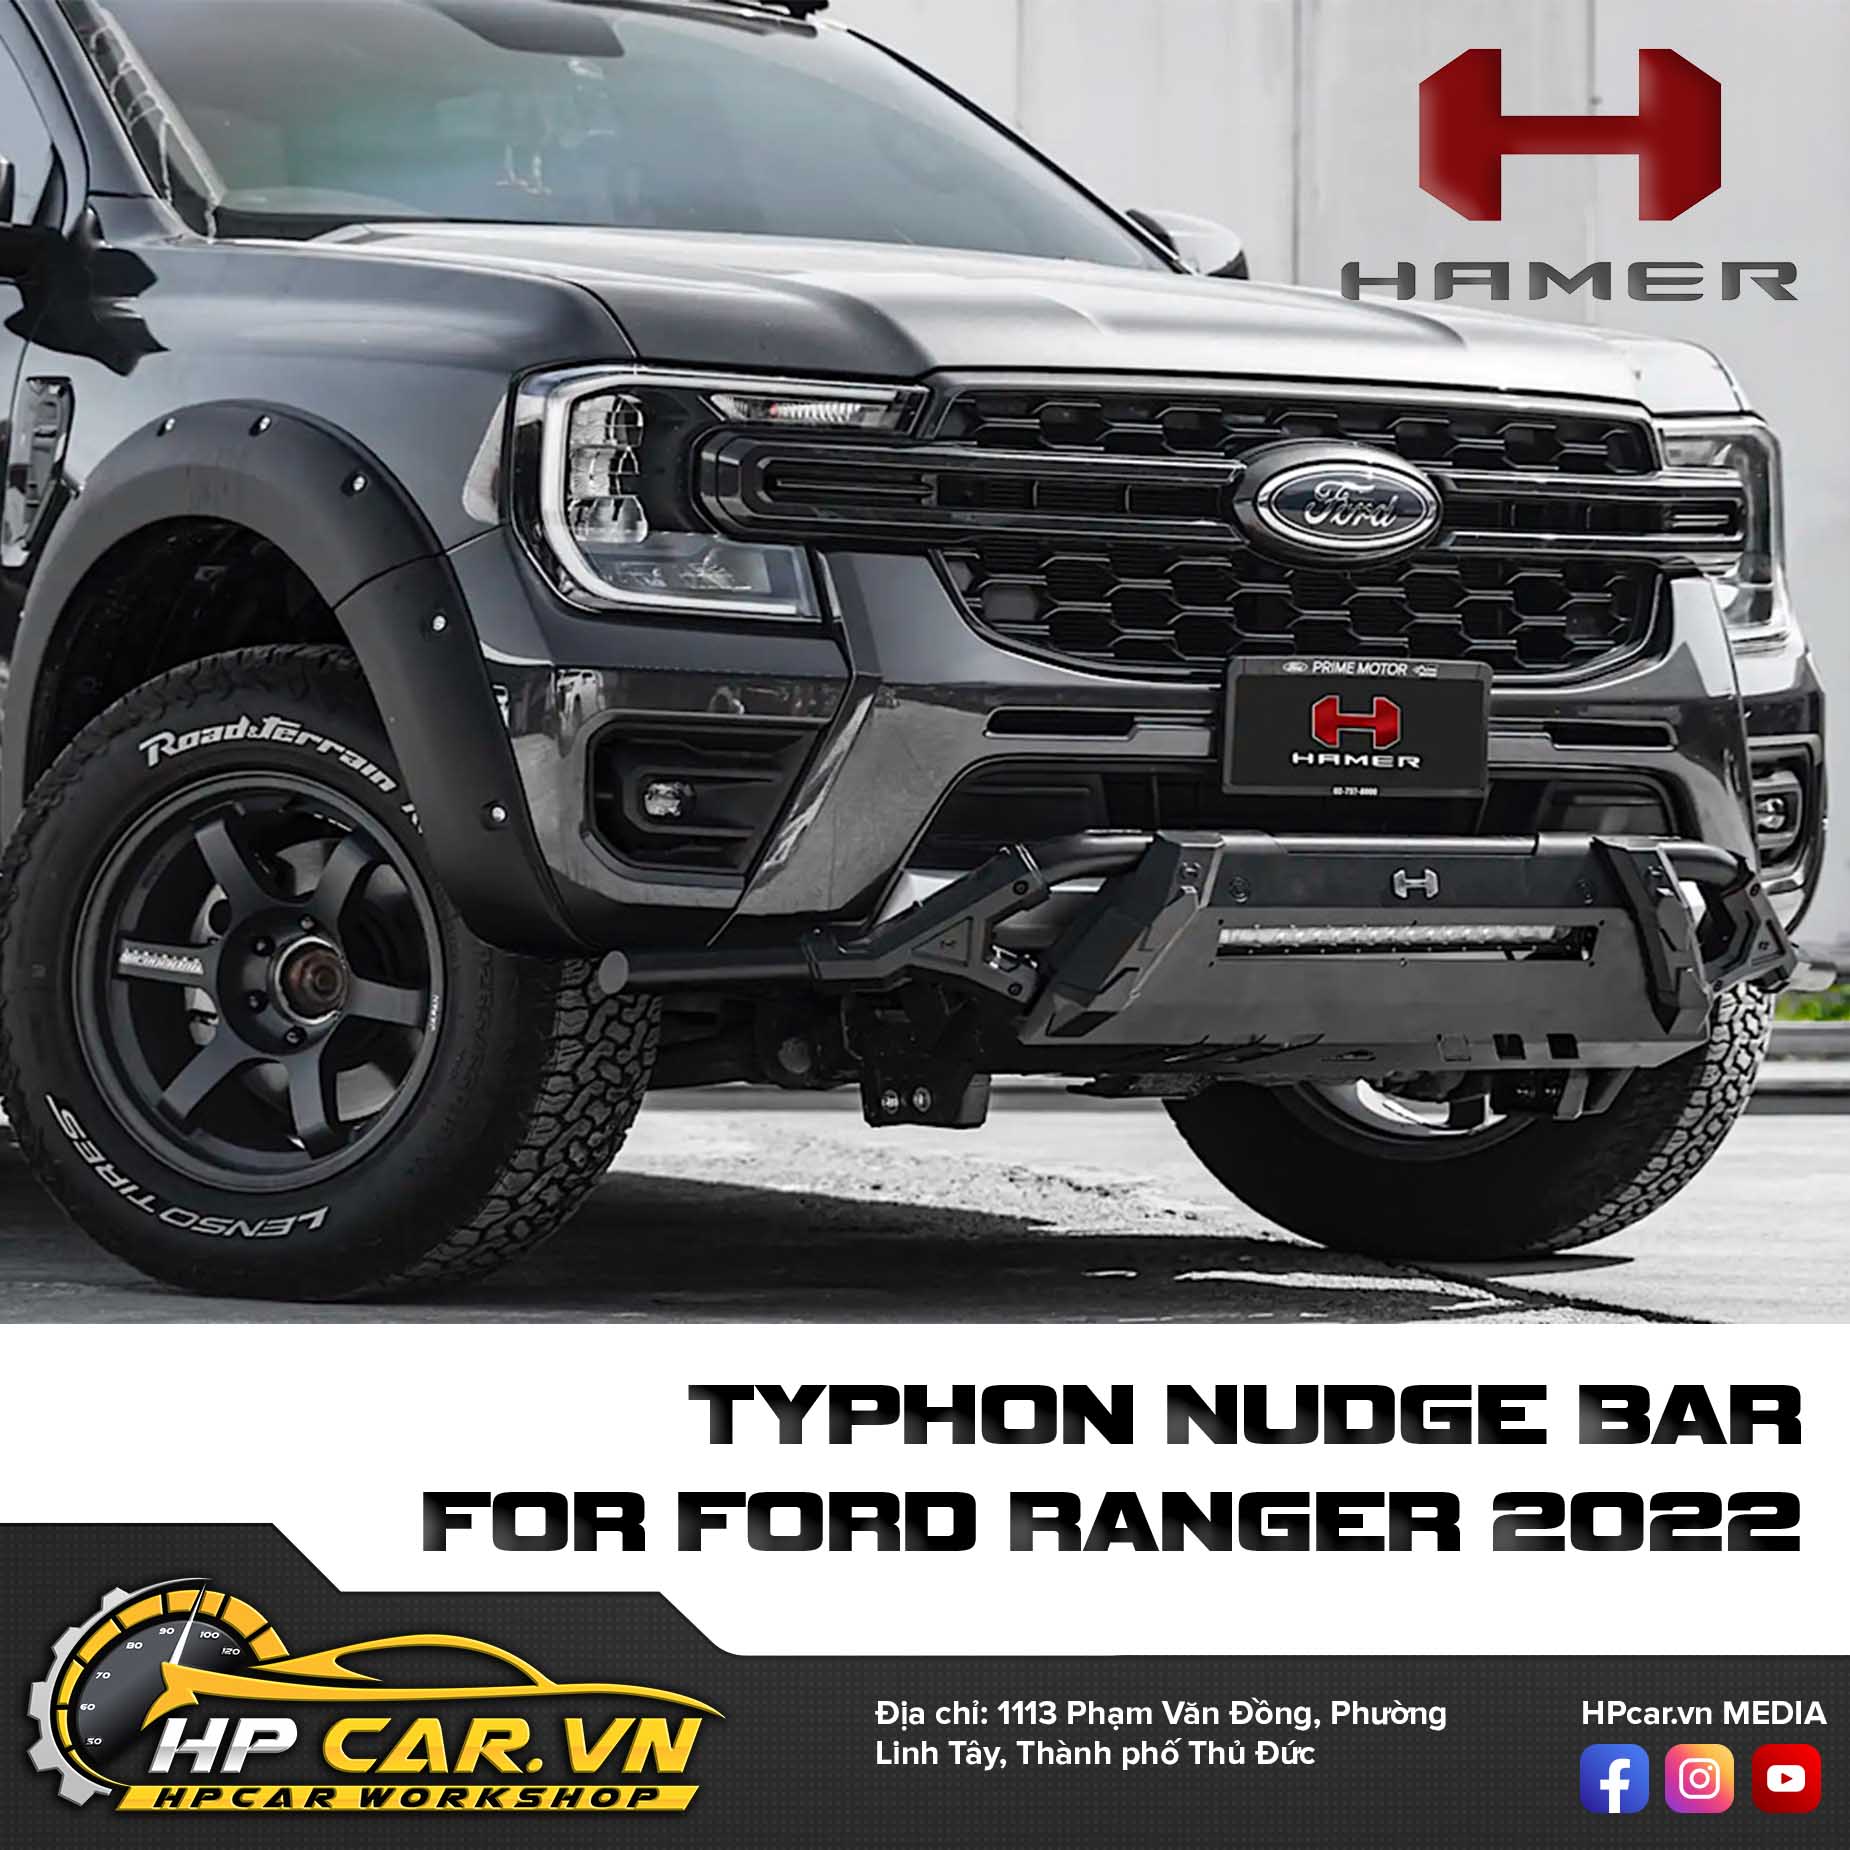 TYPHON NUDGE BAR FOR FORD RANGER 2022